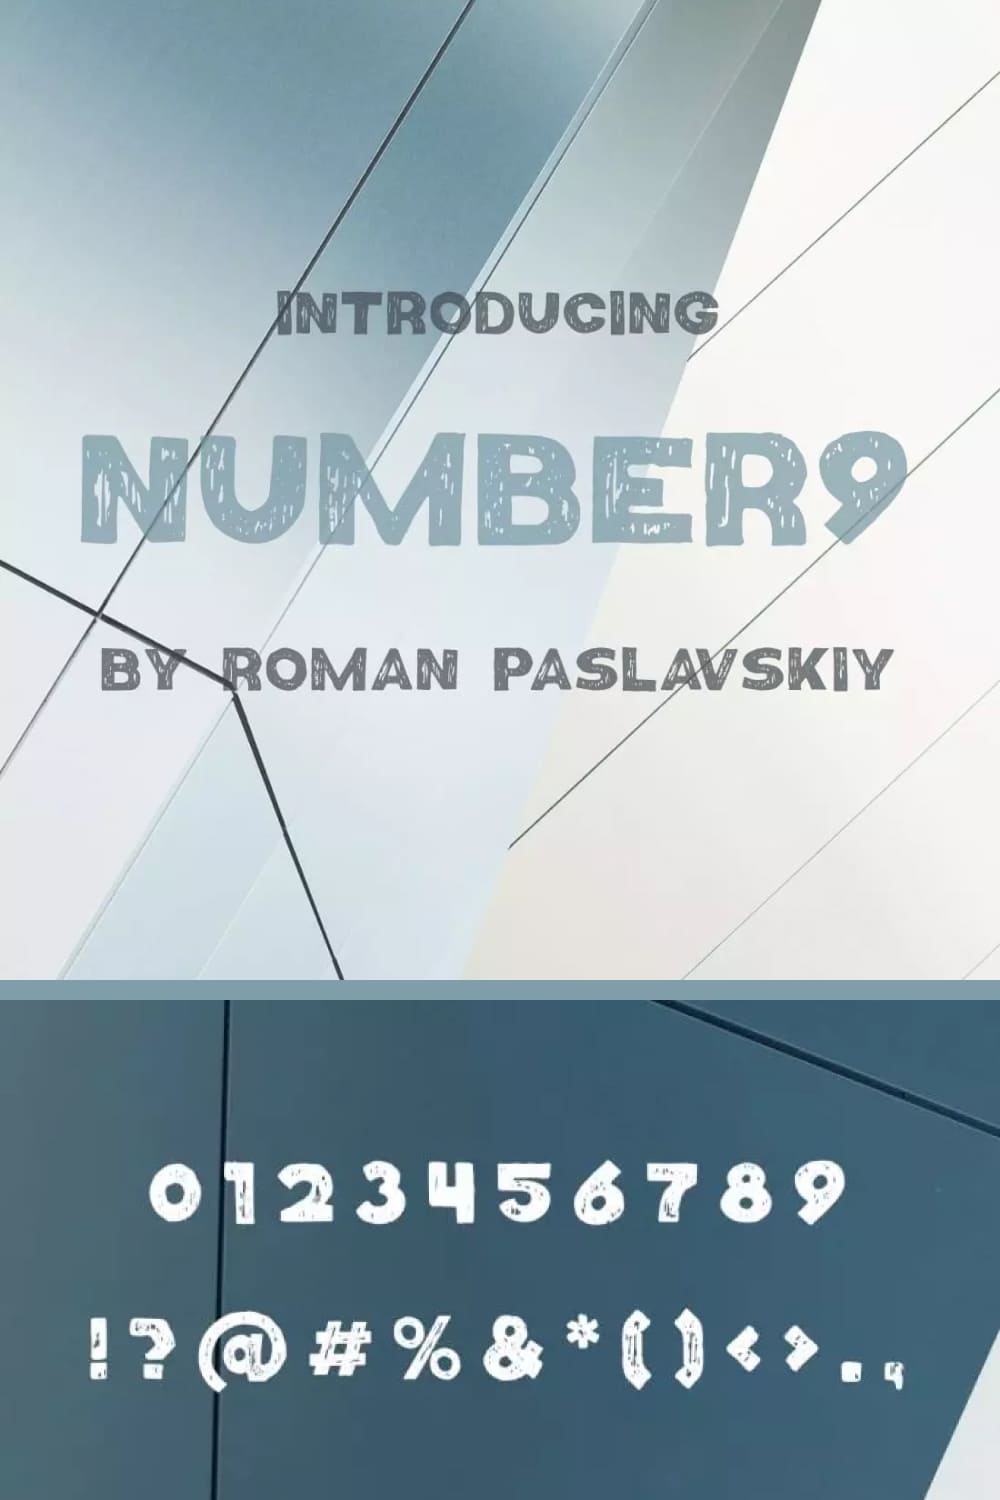 Example of a Number Font with thick letters.